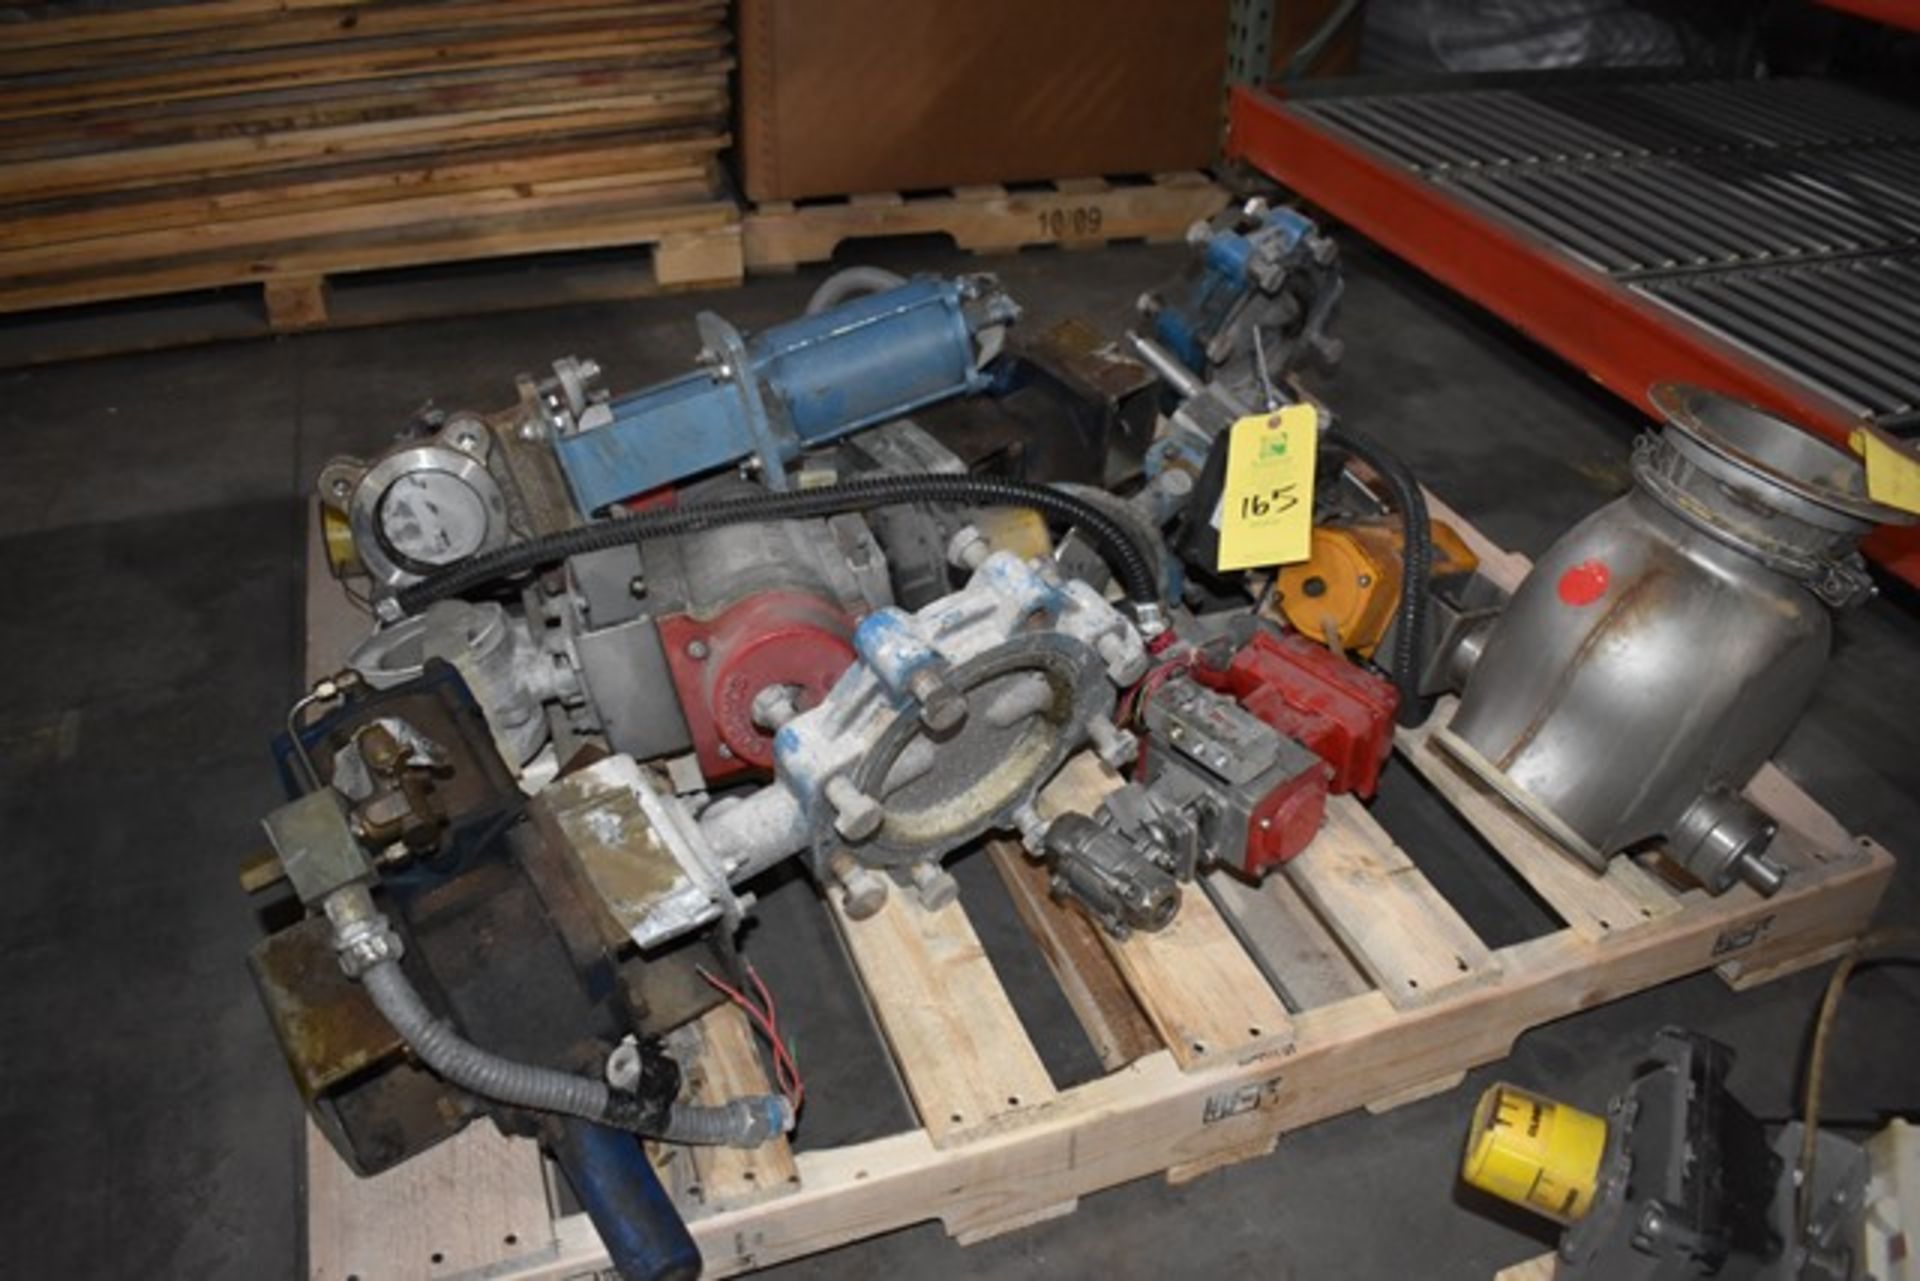 Pallet - Valves/Actuators, Assorted. Rigging/Loading Fee: $25 - Image 2 of 2